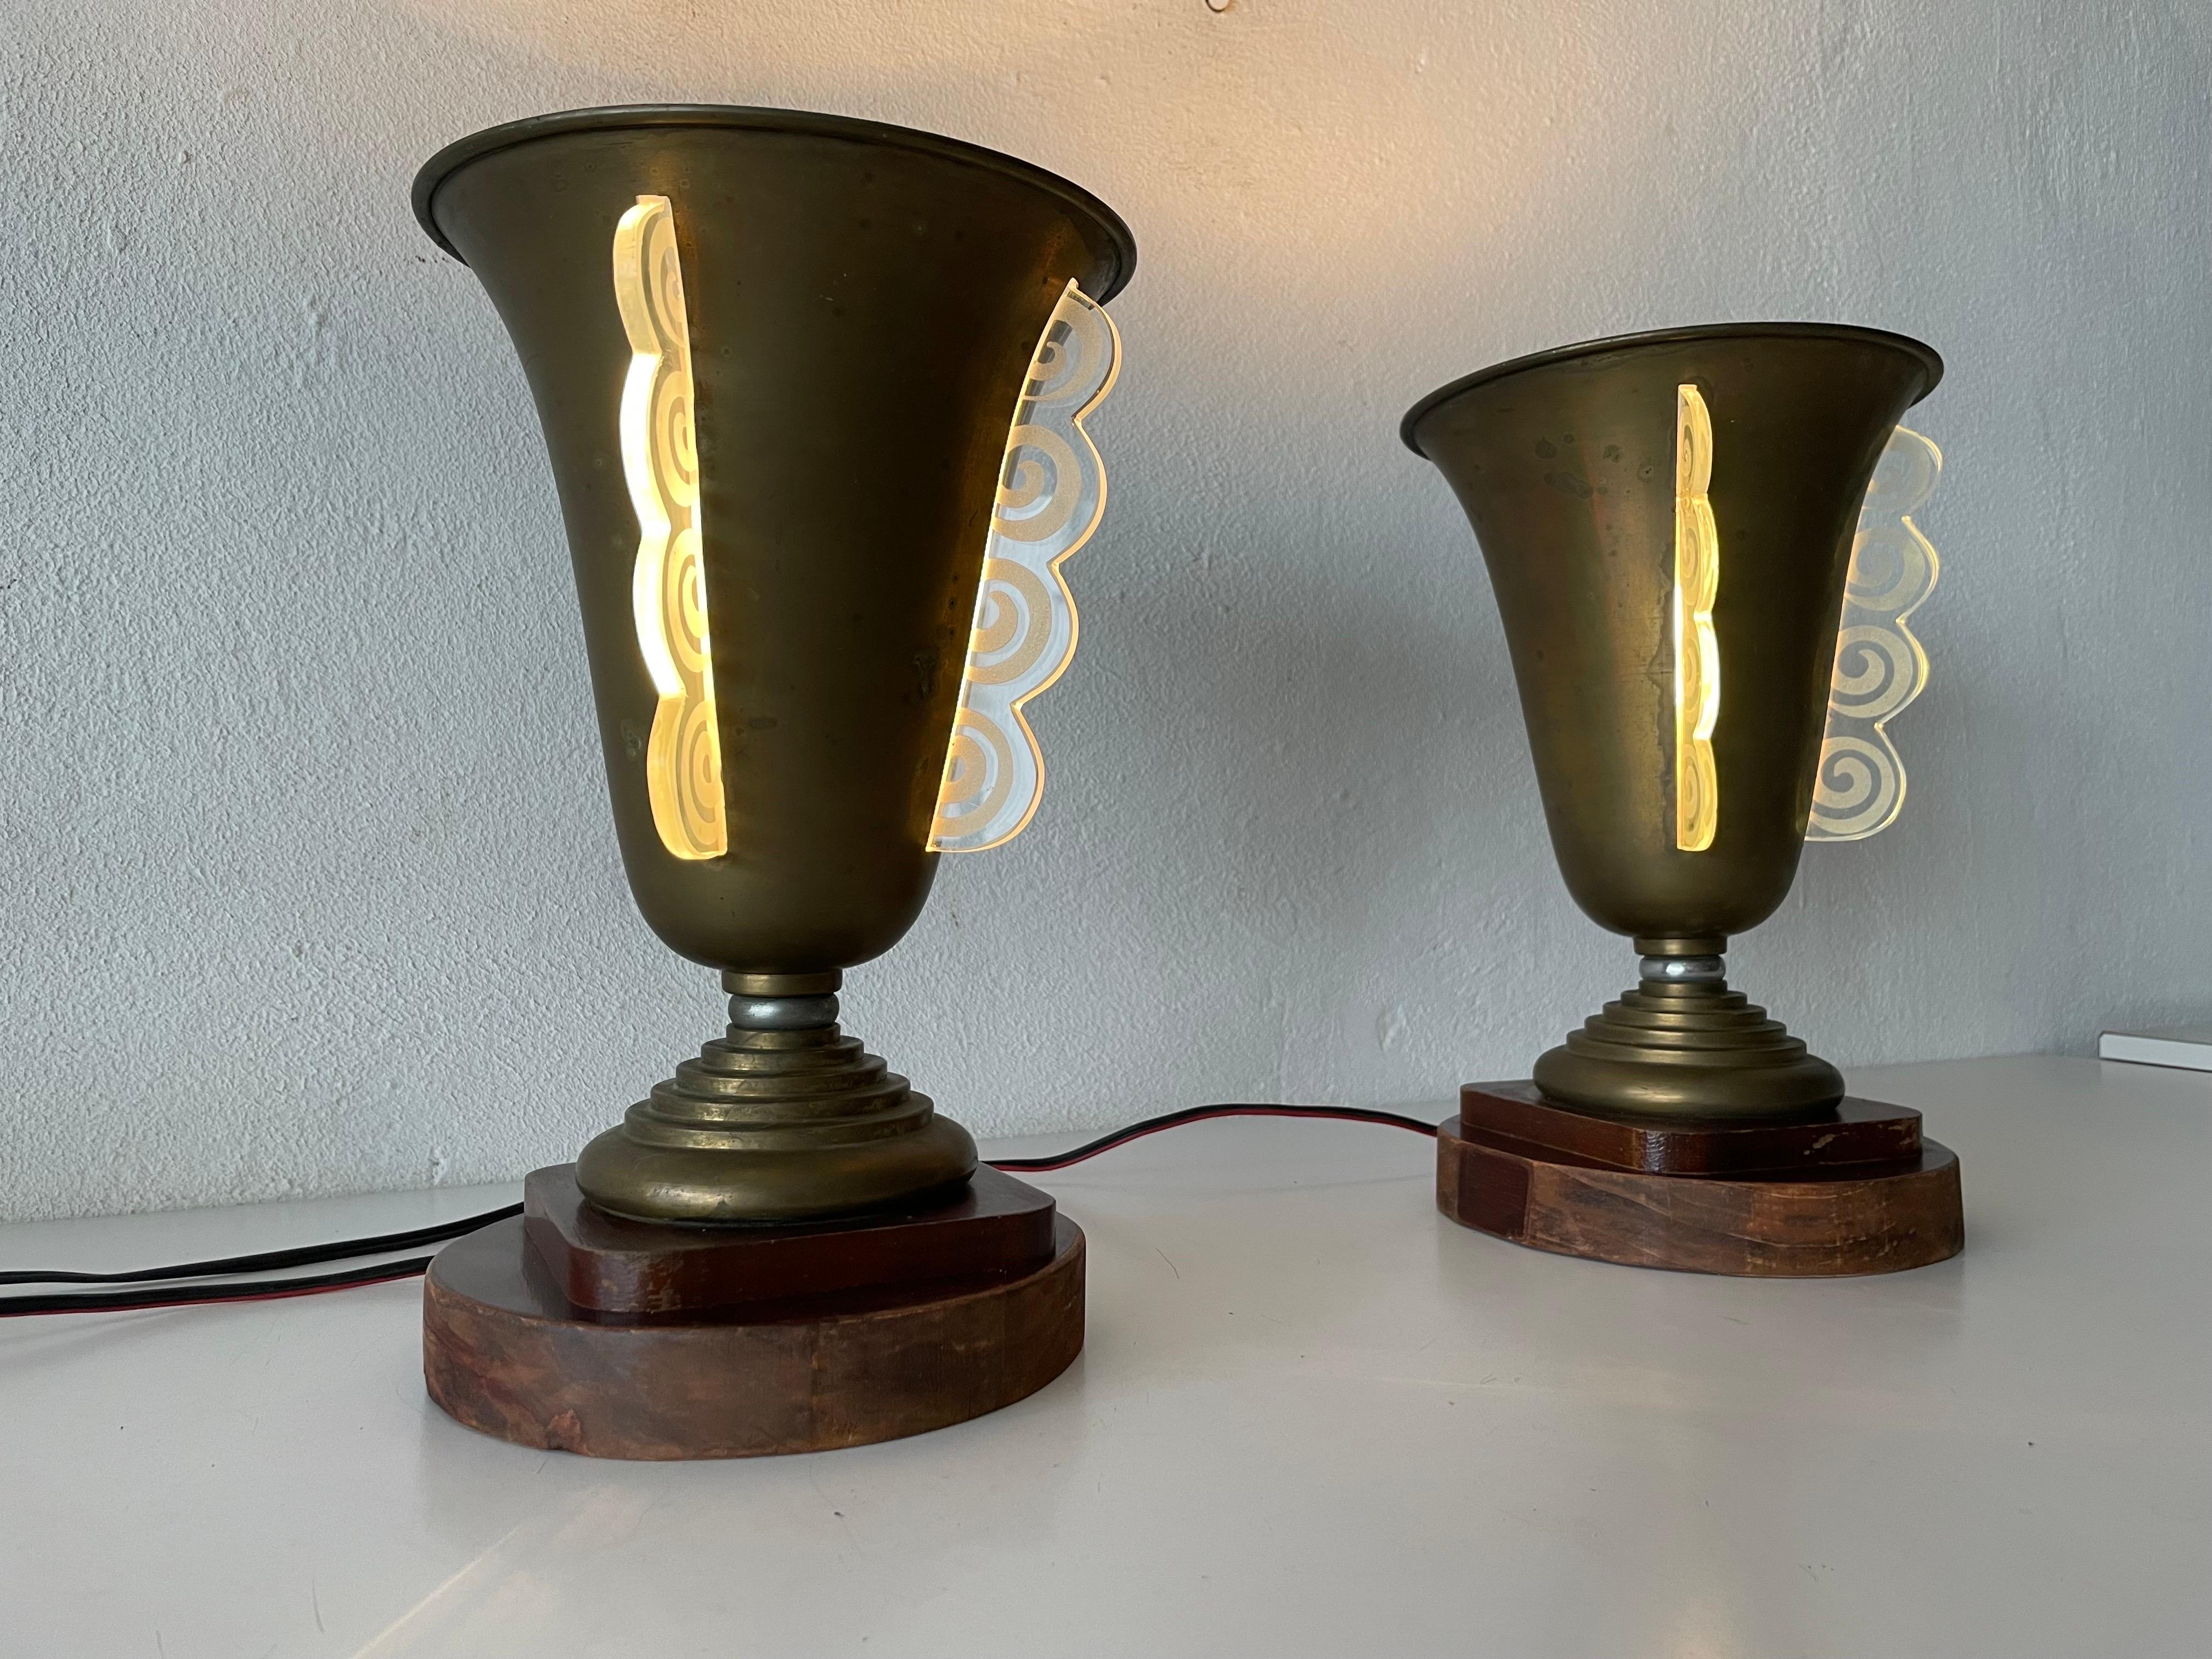 Art Deco Conic Design Pair of Table Lamps by Mazda, 1940s, France For Sale 8